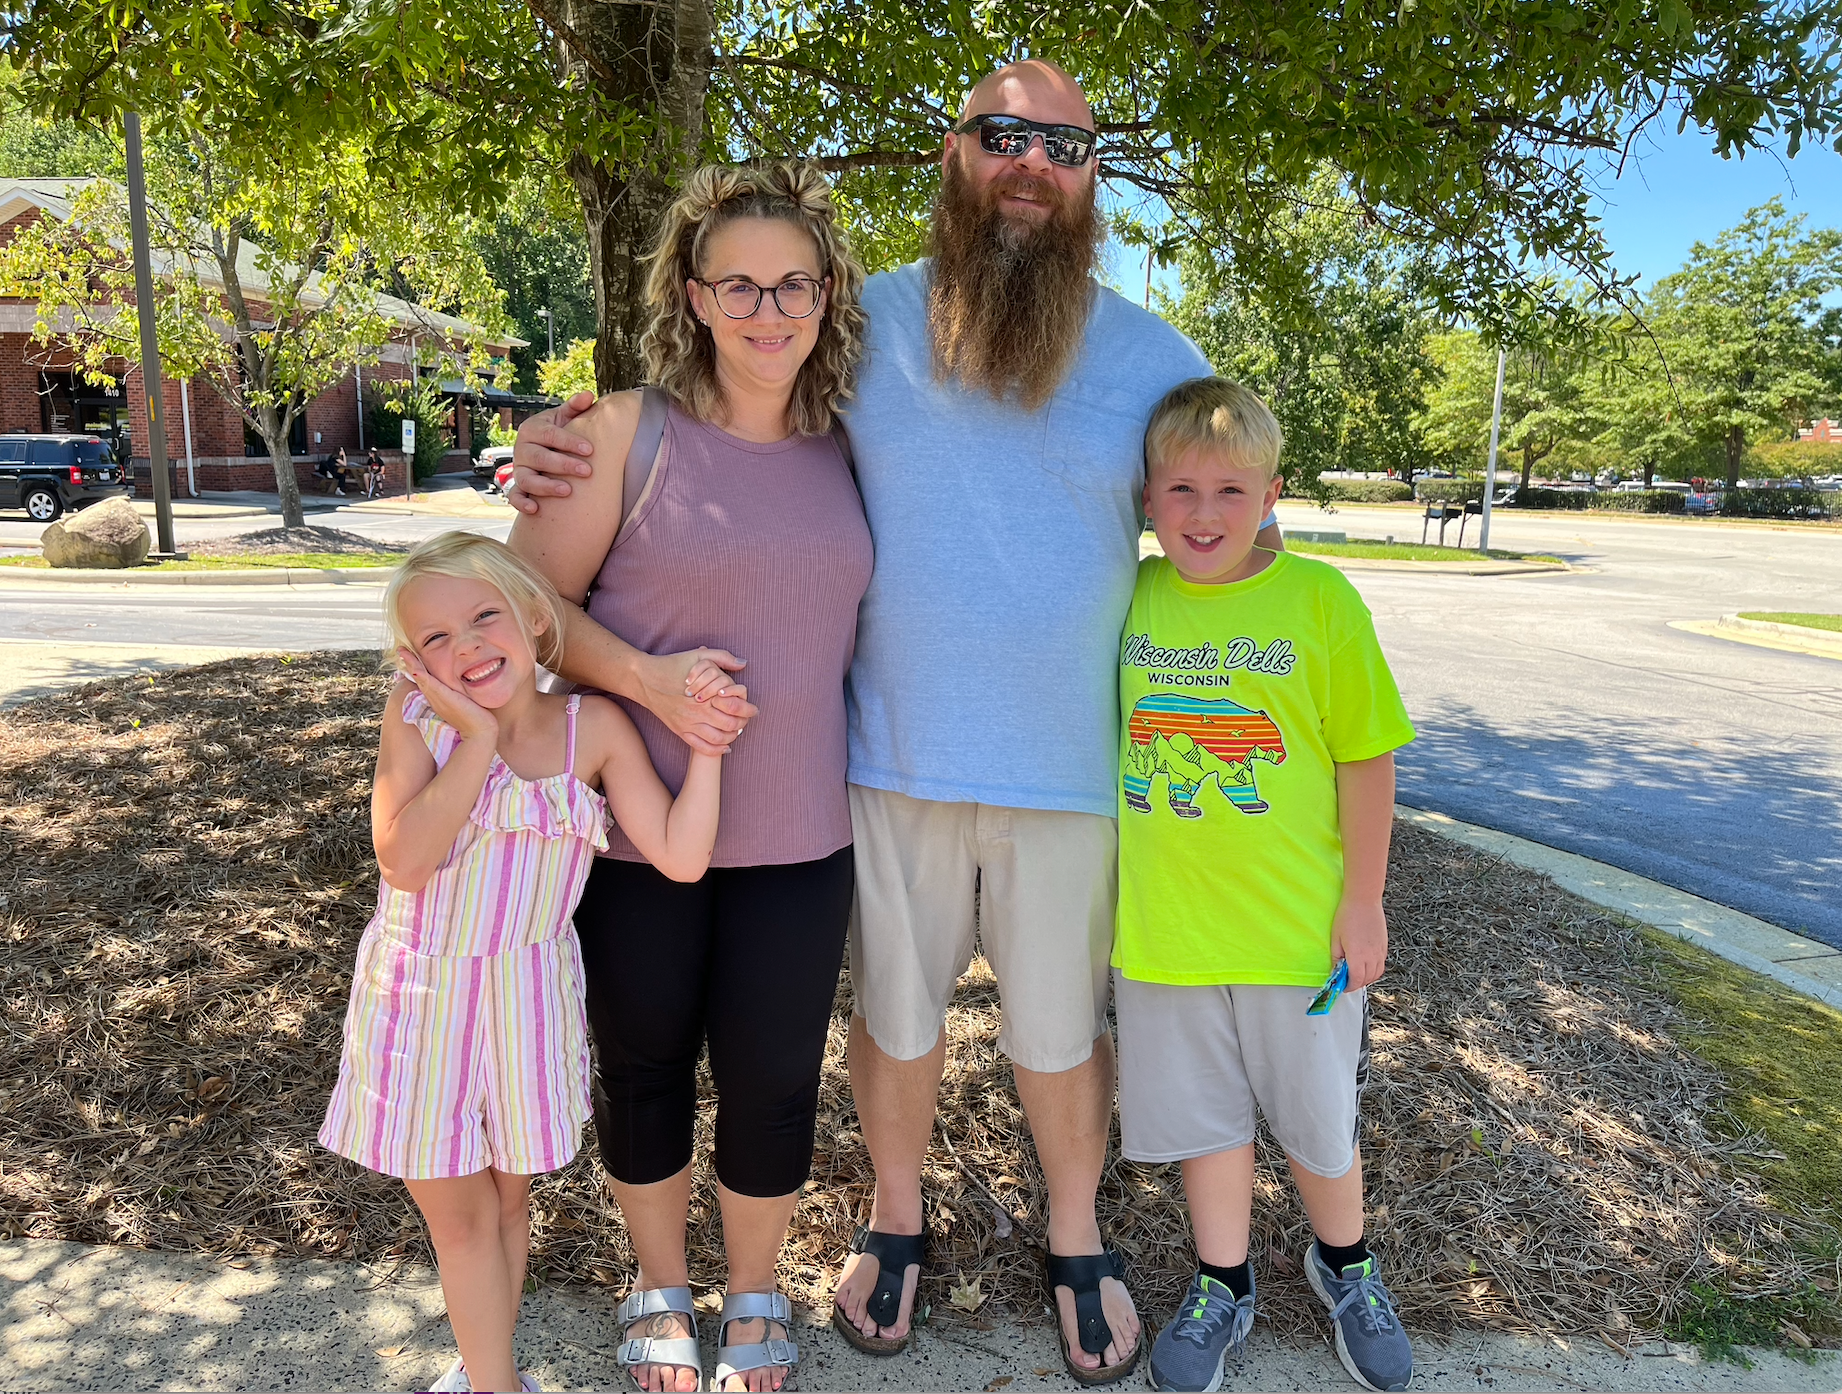 Maggie Cambora, pictured with her family, received a diagnosis of acute myeloid leukemia in 2020, and was the recipient of a stem cell transplant the following year. (Photo courtesy of Maggie Cambora)